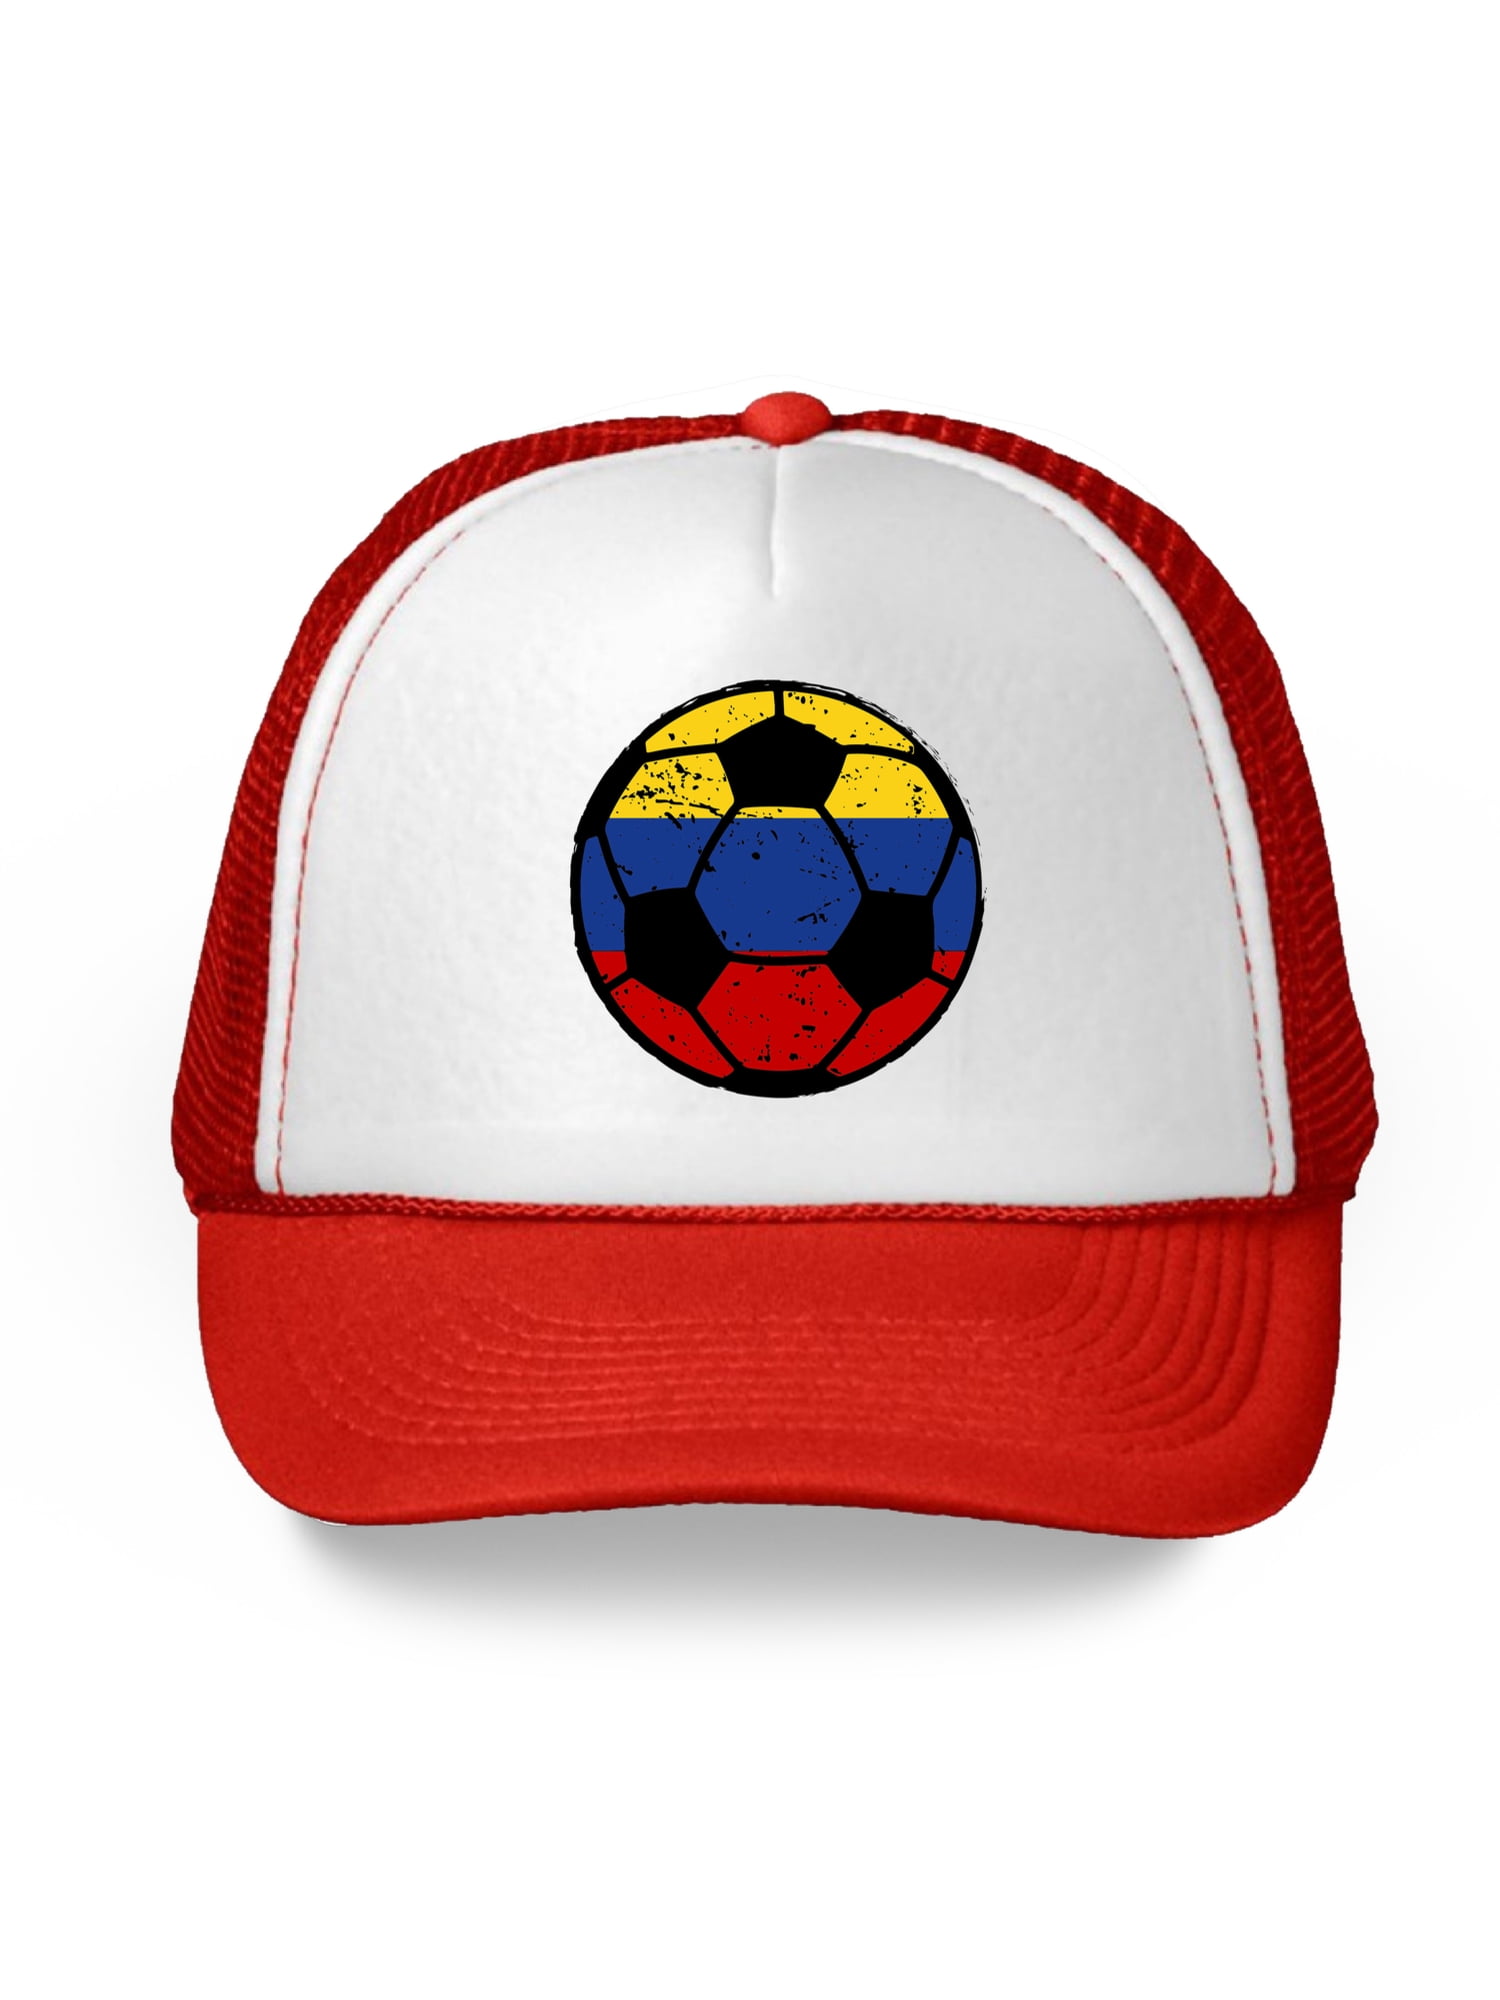 Love Basketball Colombia Flag Women and Men Thick Surf Skull Cap